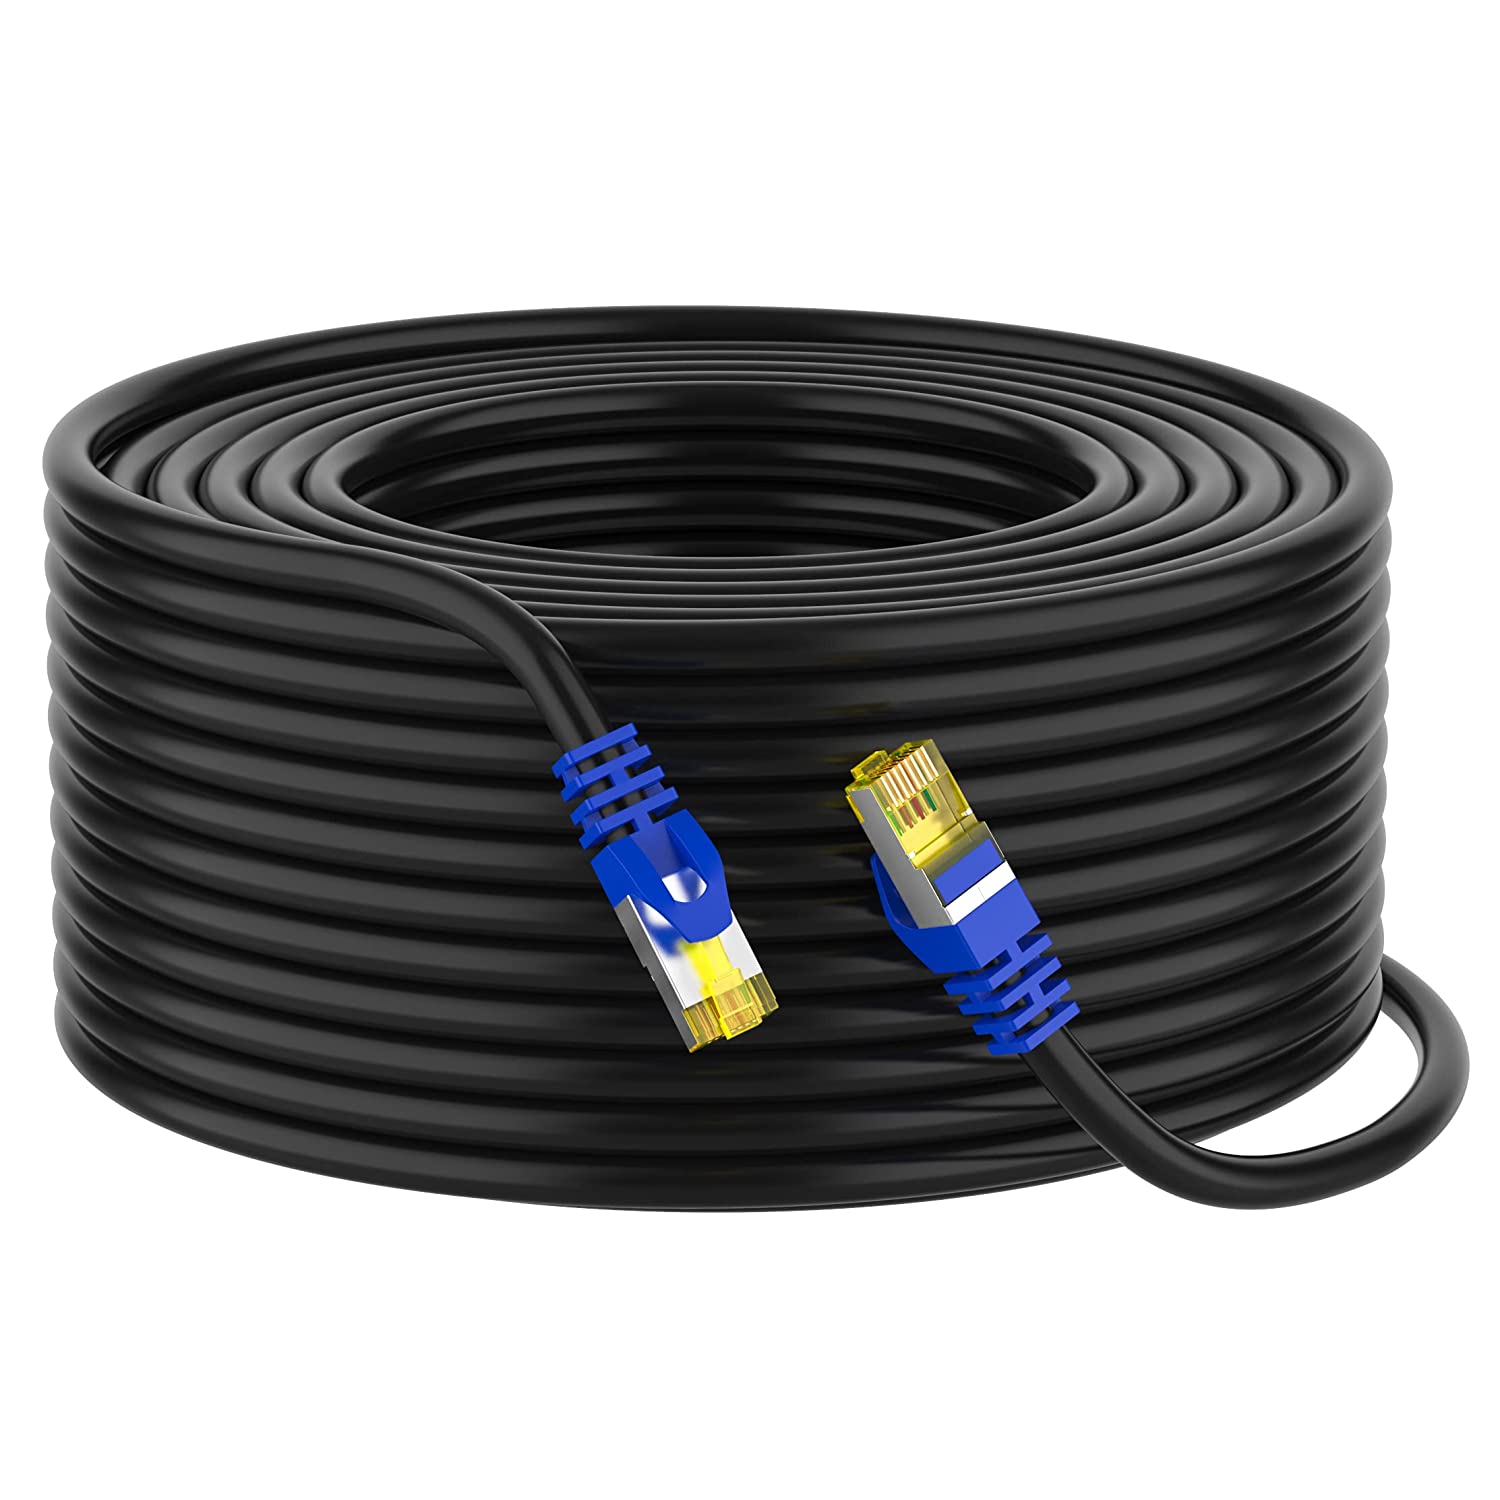 Cat 5e Ethernet Cable 25ft, Cat 5 Internet Patch Cable Cat5e Cable RJ45  Connector LAN Network Cable Cat5 Wire Patch Cord Snagless Computer Ether  Wire